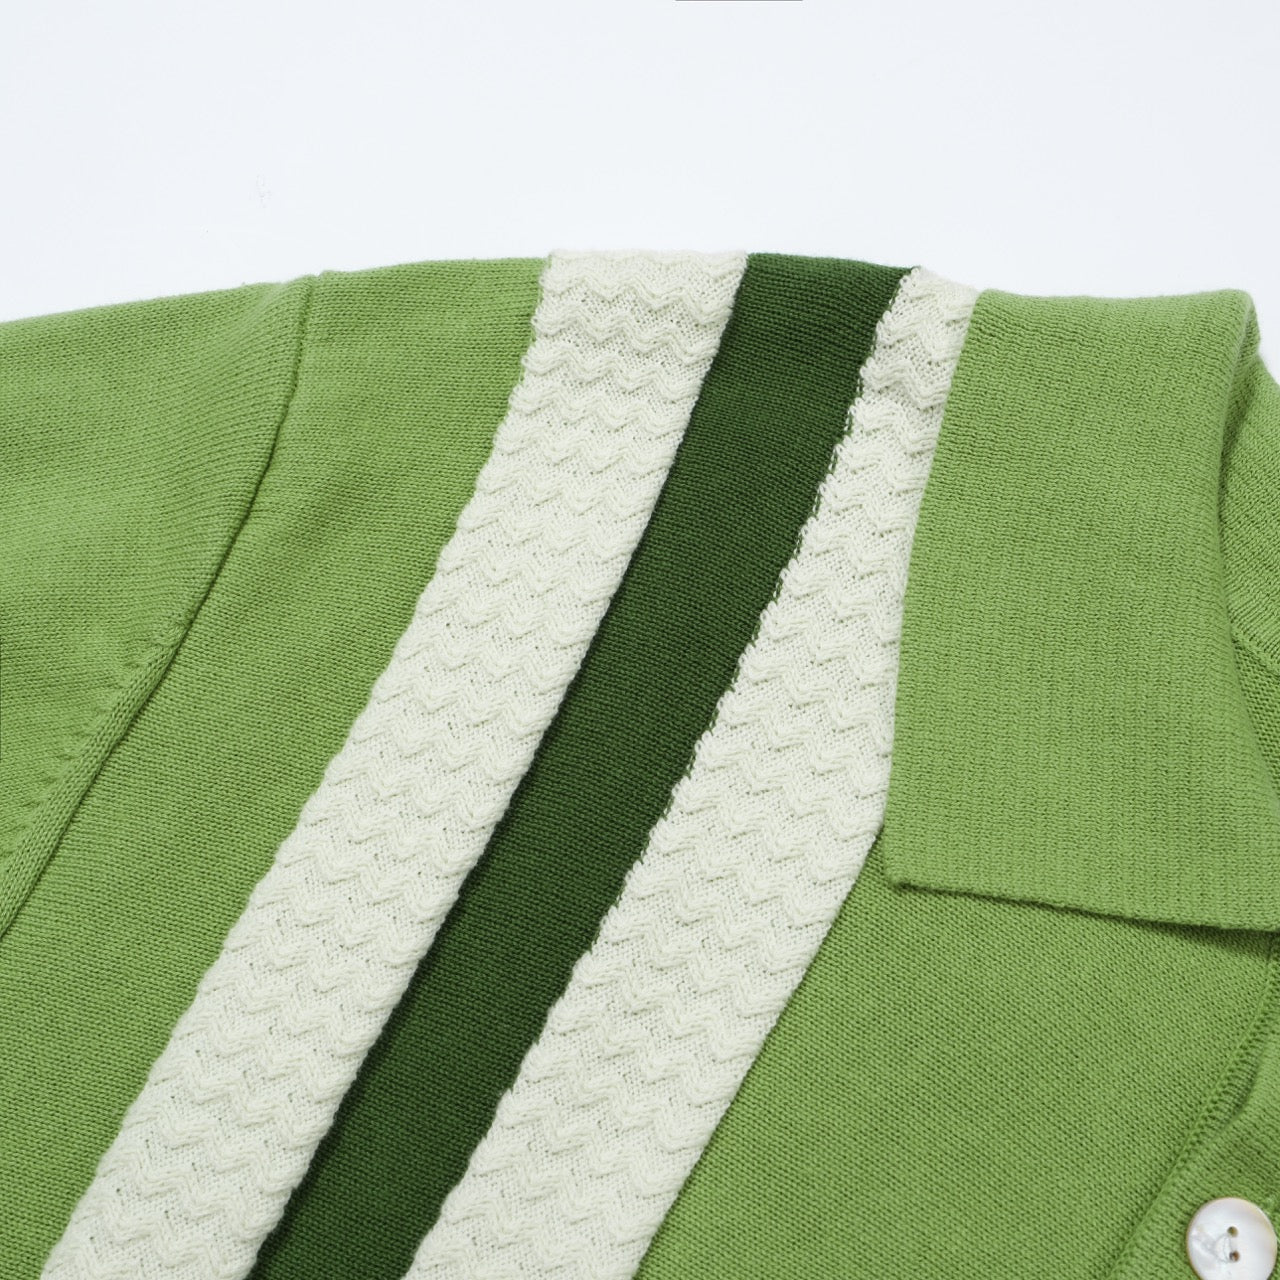 OXKNIT Men Vintage Clothing 1960s Mod Style Casual Stripe Green Knit ...